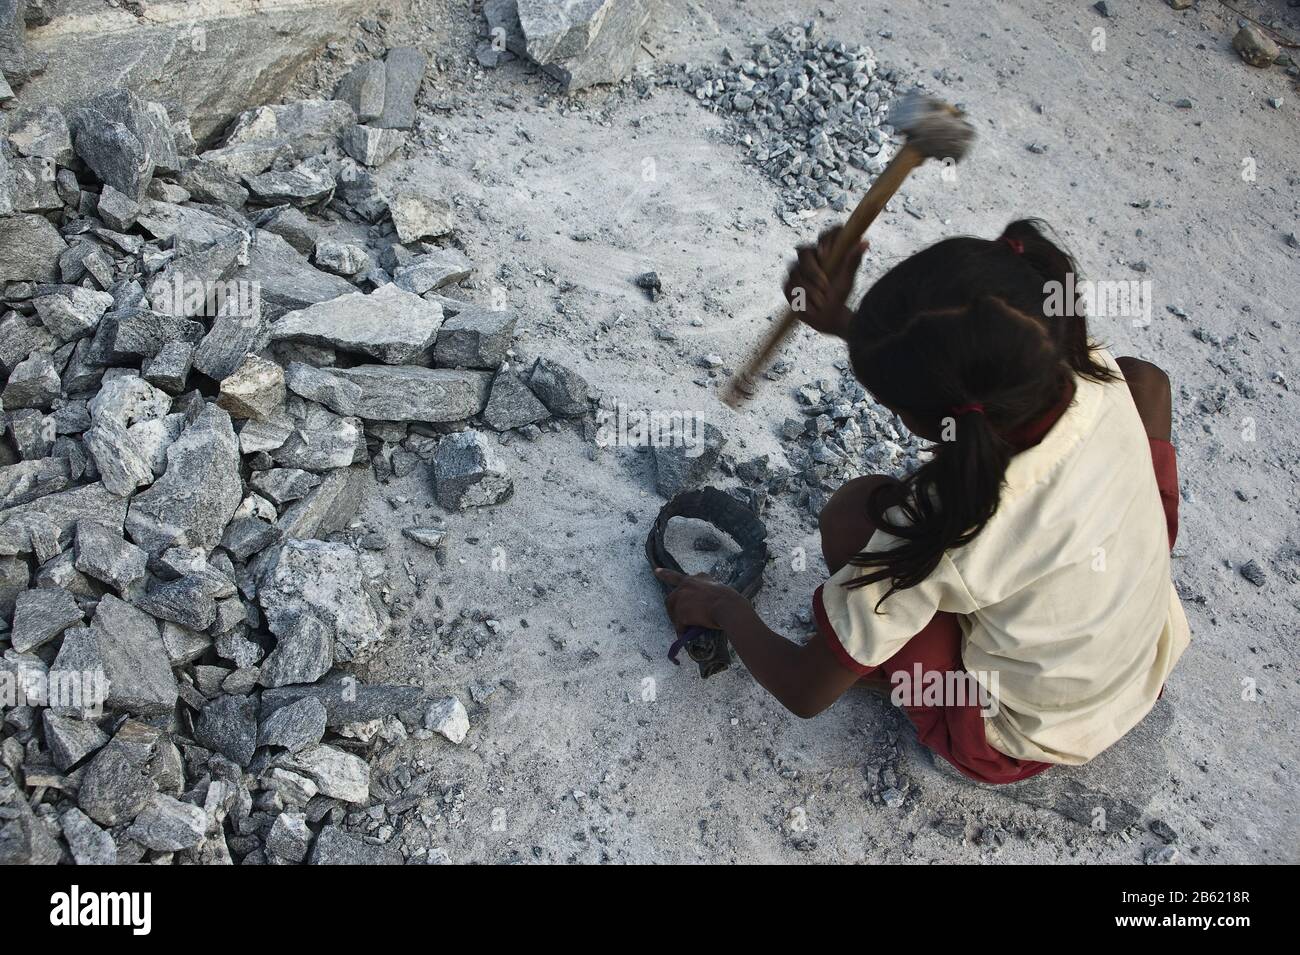 Girl breaking stones in a quarry ( India) Stock Photo